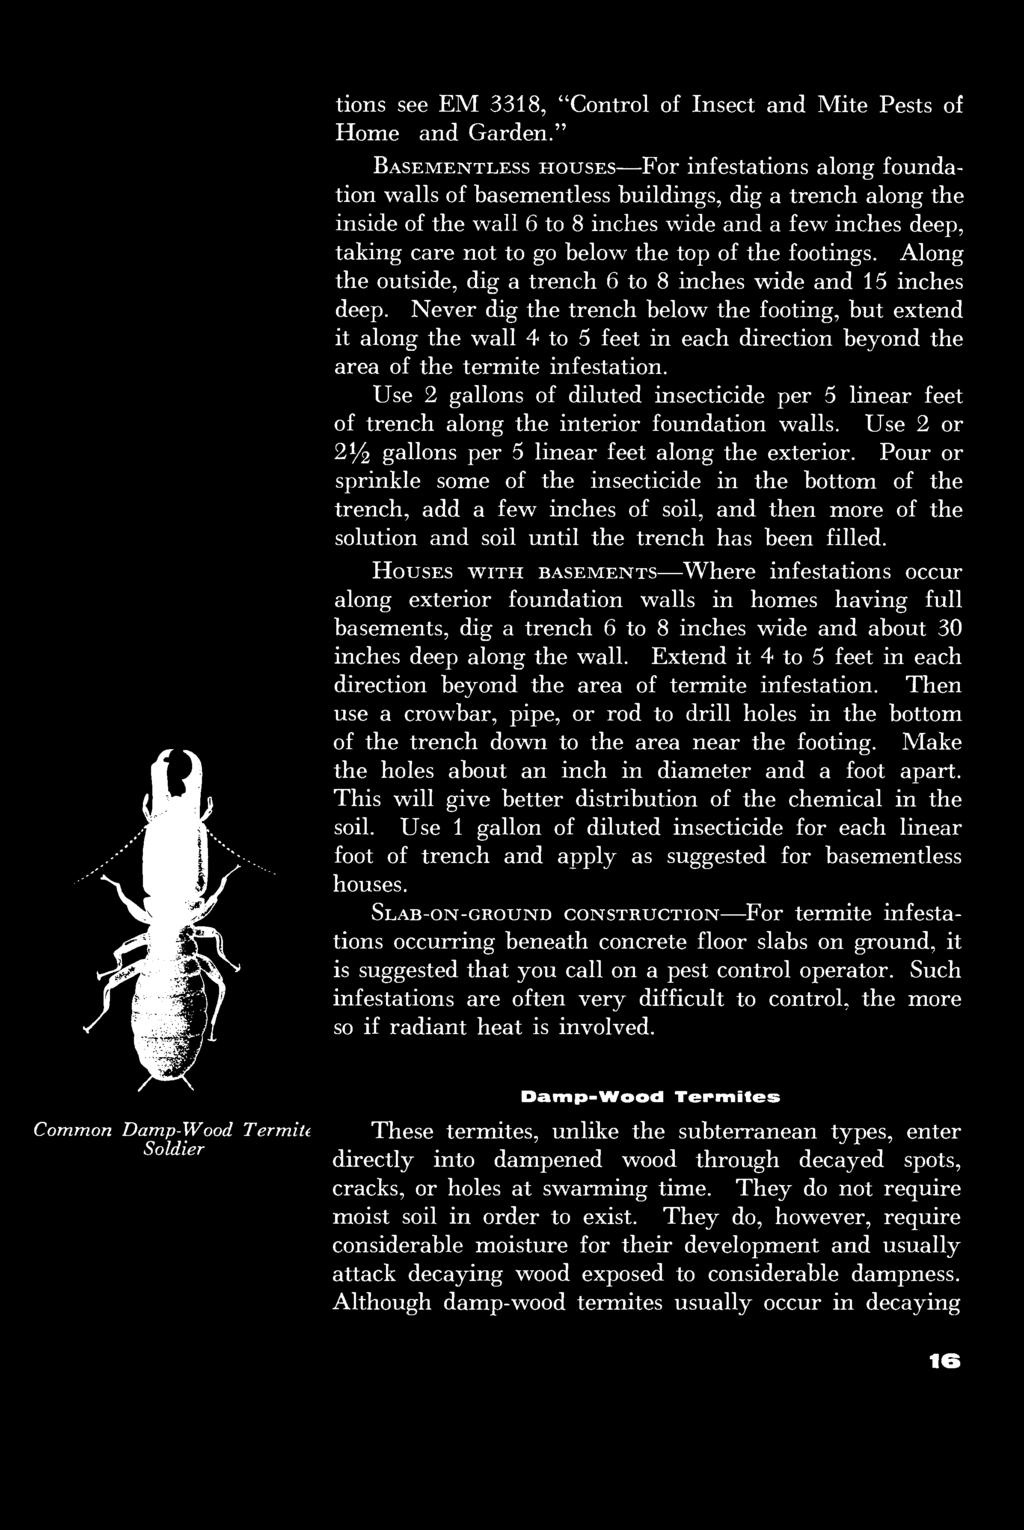 tions see EM 3318, "Control of Insect and Mite Pests of Home and Garden.